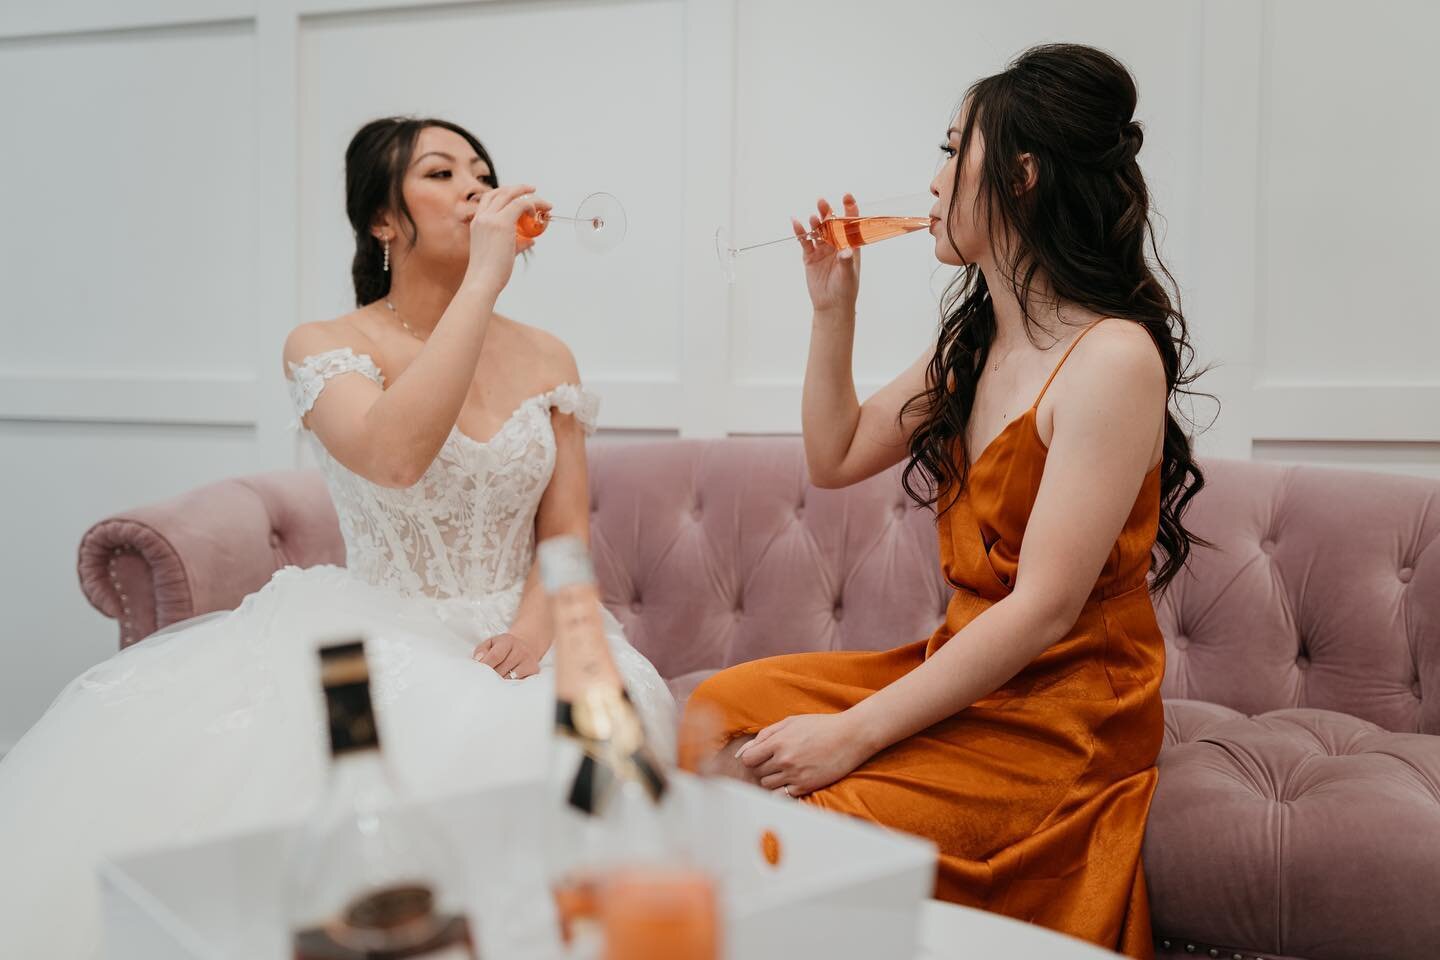 The party doesn&rsquo;t start until the bride walks in 👰🏻&zwj;♀️ Full fairytale mode in our bridal suite, enjoying a moment with her maid of honor before the big &ldquo;I Do!&rdquo;🤍
.

Photography &amp; Videography: @symboll&nbsp;
Venue: @fetethe